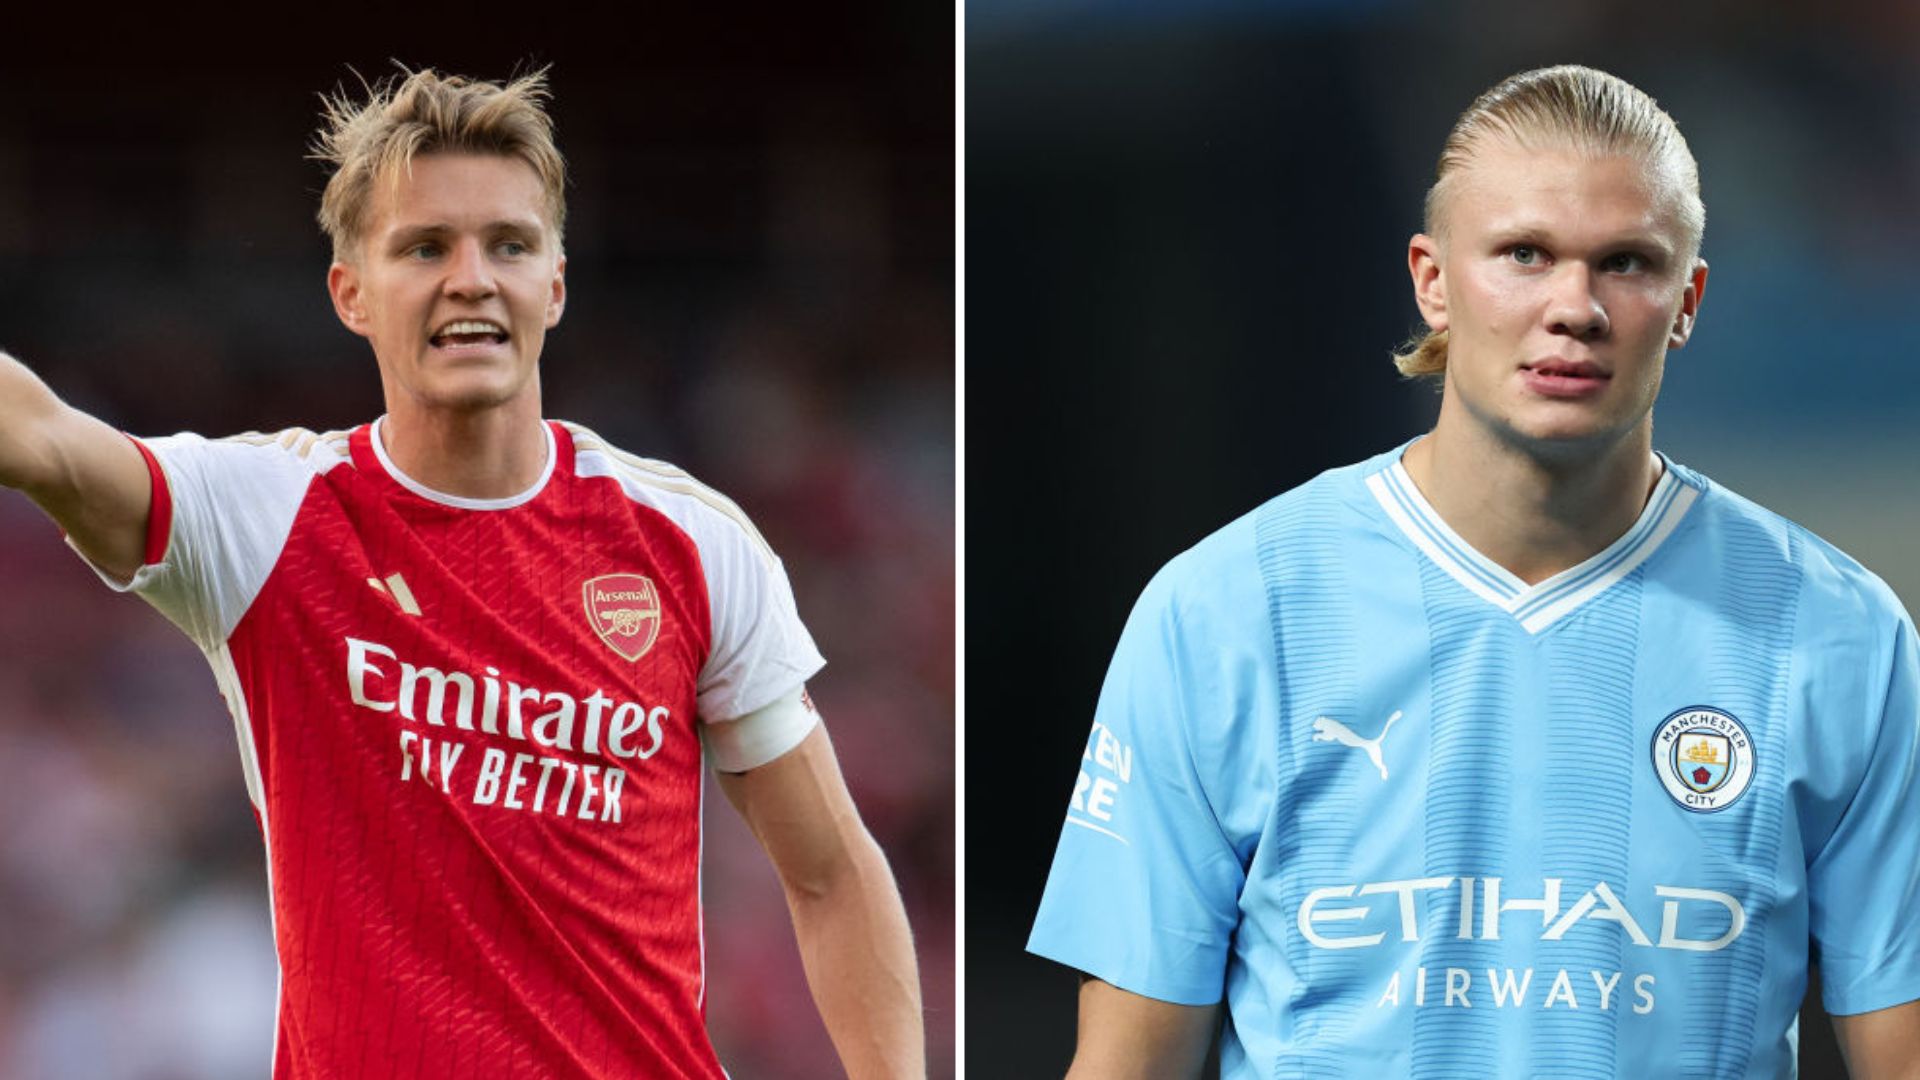 Arsenal vs Manchester City live stream, match preview and kick-off time for the Community Shield FourFourTwo